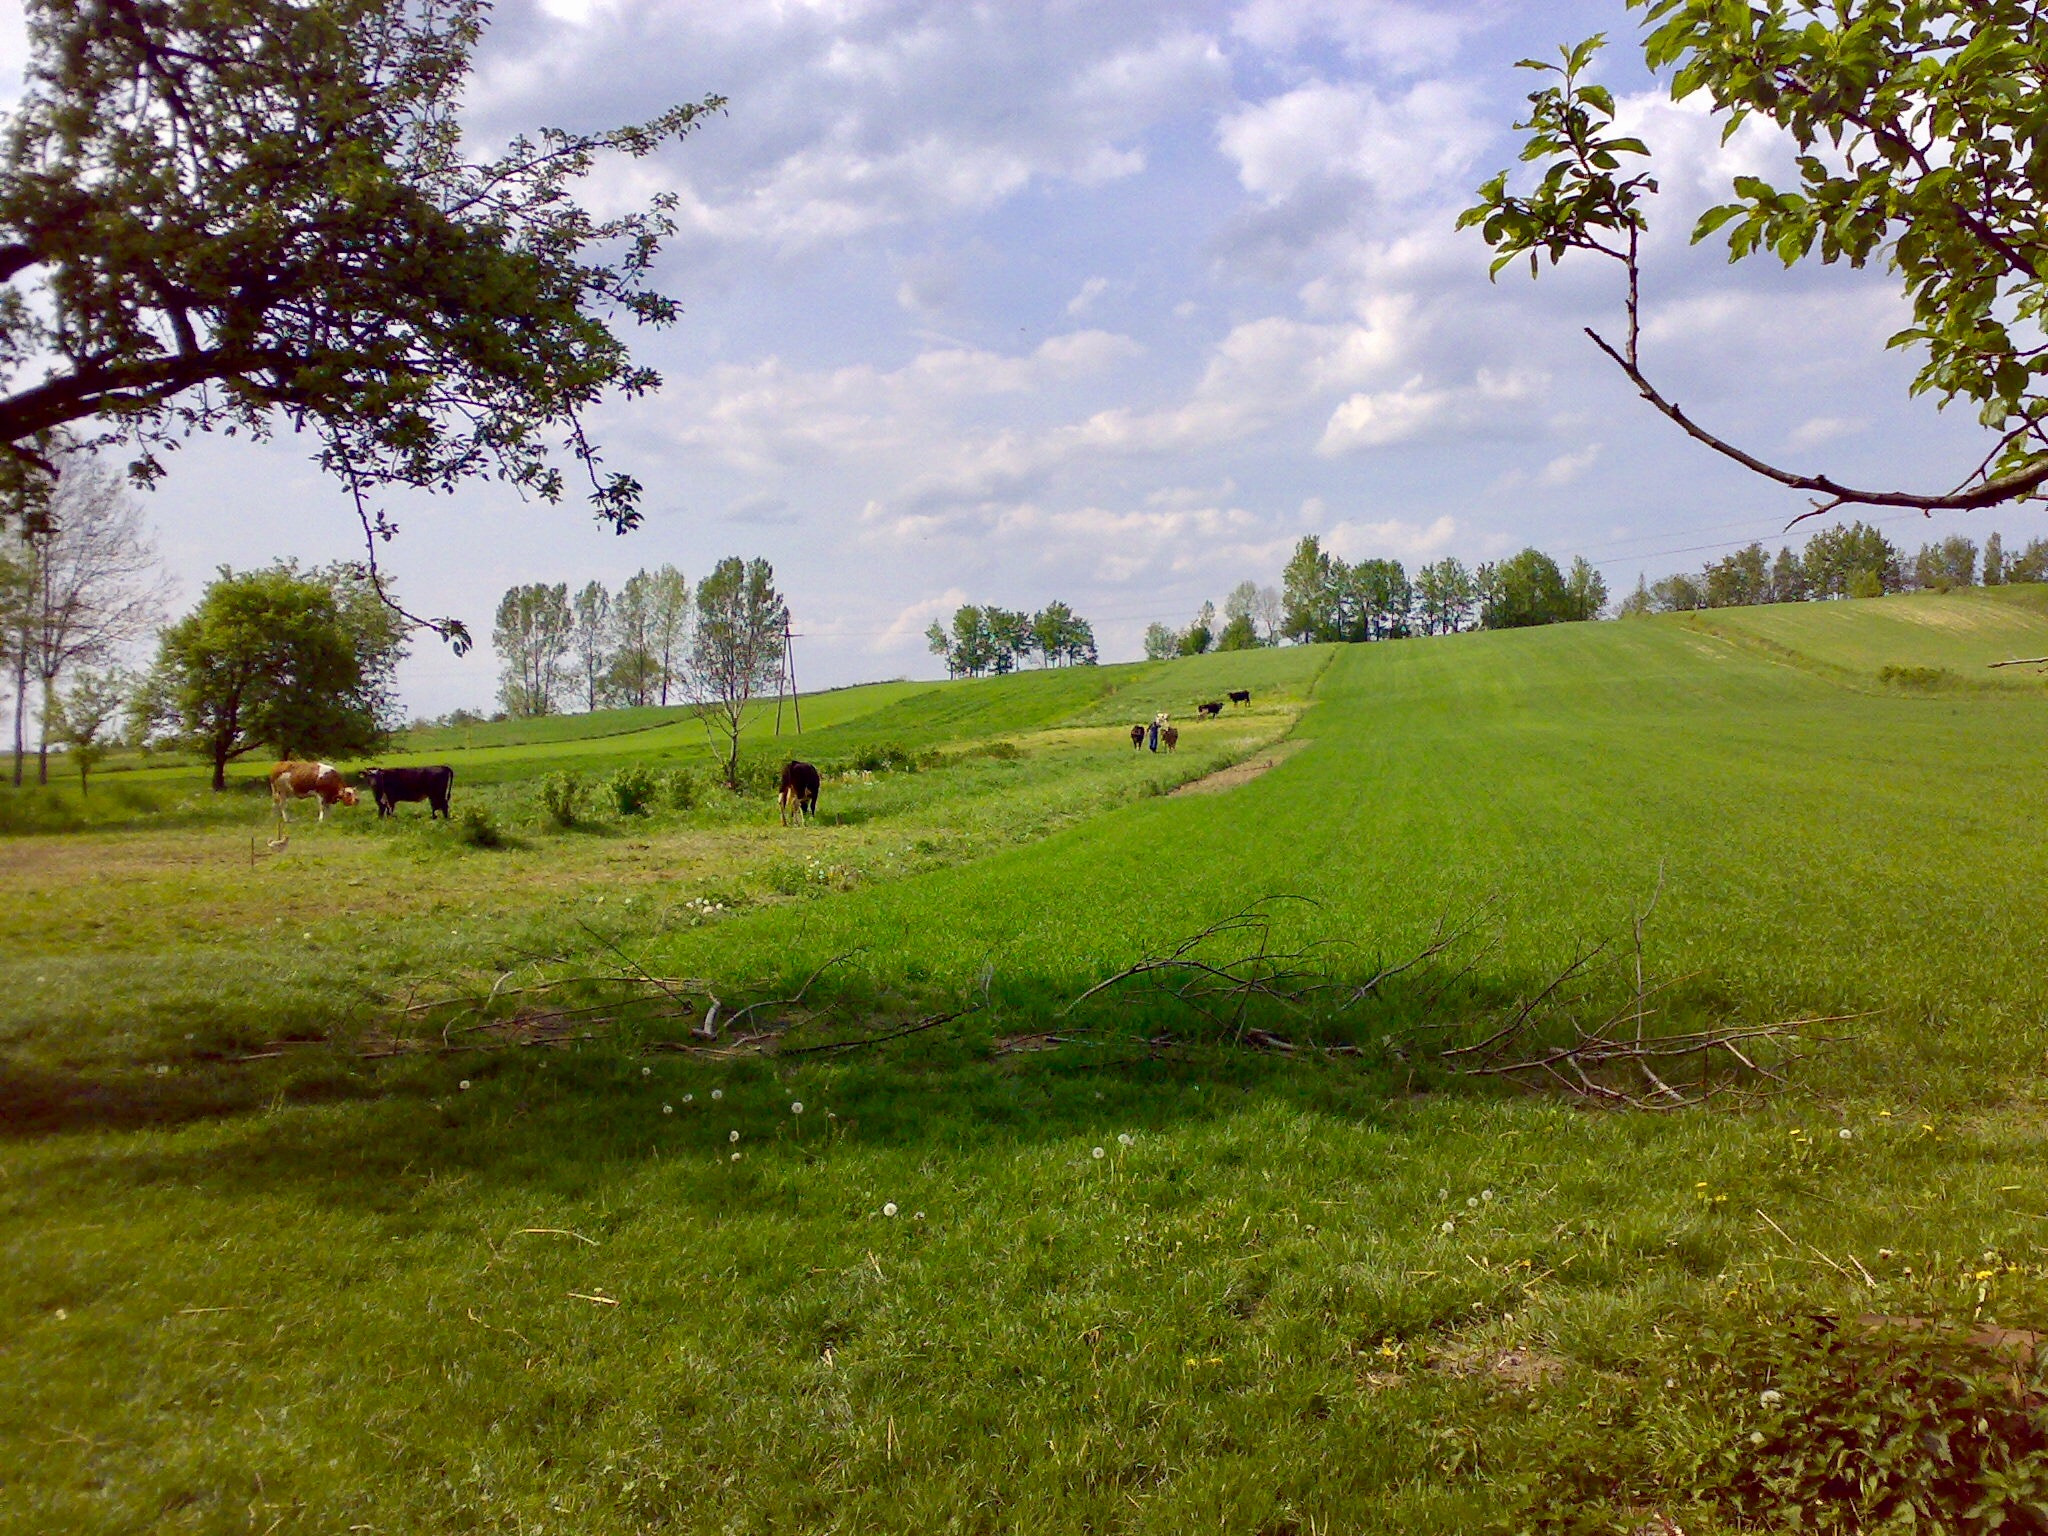 Nokia N73 sample photo. Cows on grass field photography